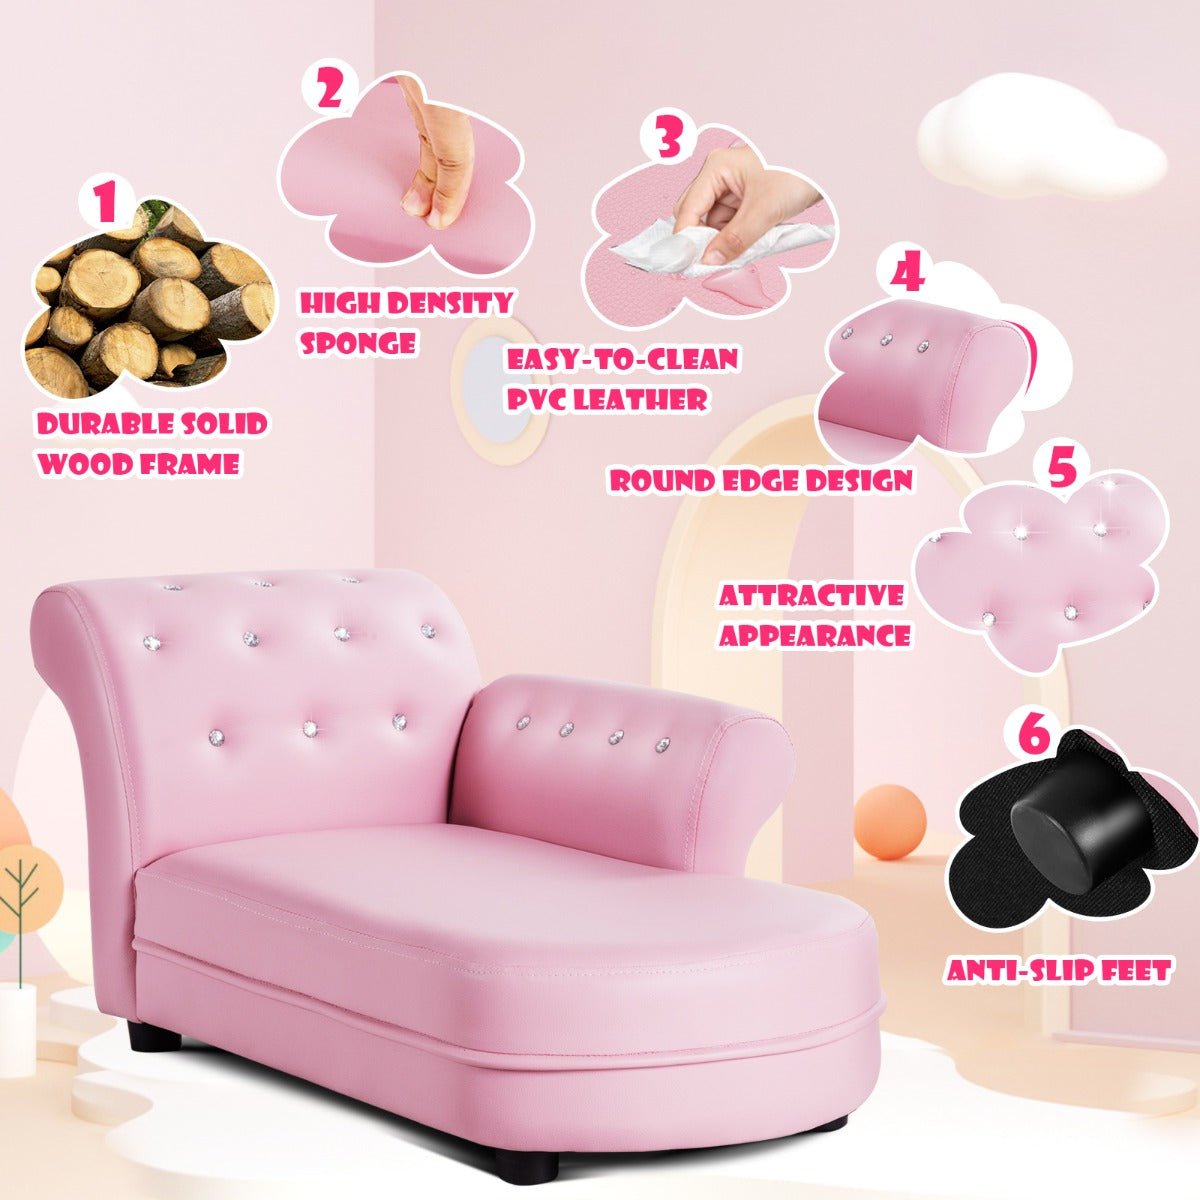 Pink Kids Sofa: PVC Leather and Crystal Embellishments - Cozy Retreat